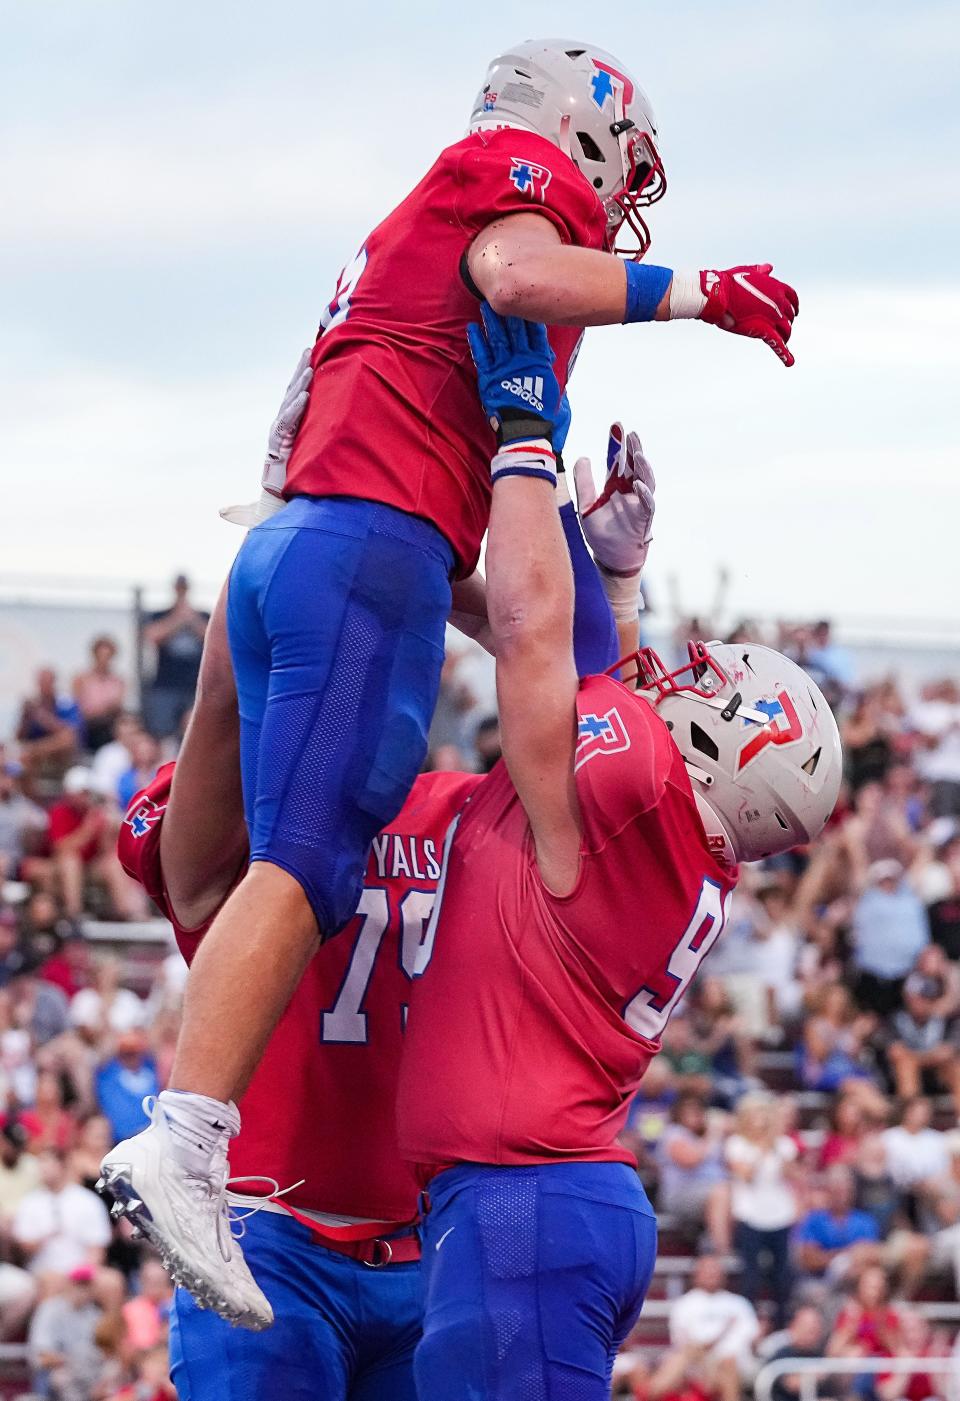 Roncalli Royals running back Luke Hansen (5) is lifted up by Roncalli Royals Luke Swartz (99) on Friday, Sept. 2, 2022, at Roncalli High School in Indianapolis. Roncalli Royals and the Bishop Chatard Trojans are tied at the half, 7-7. 